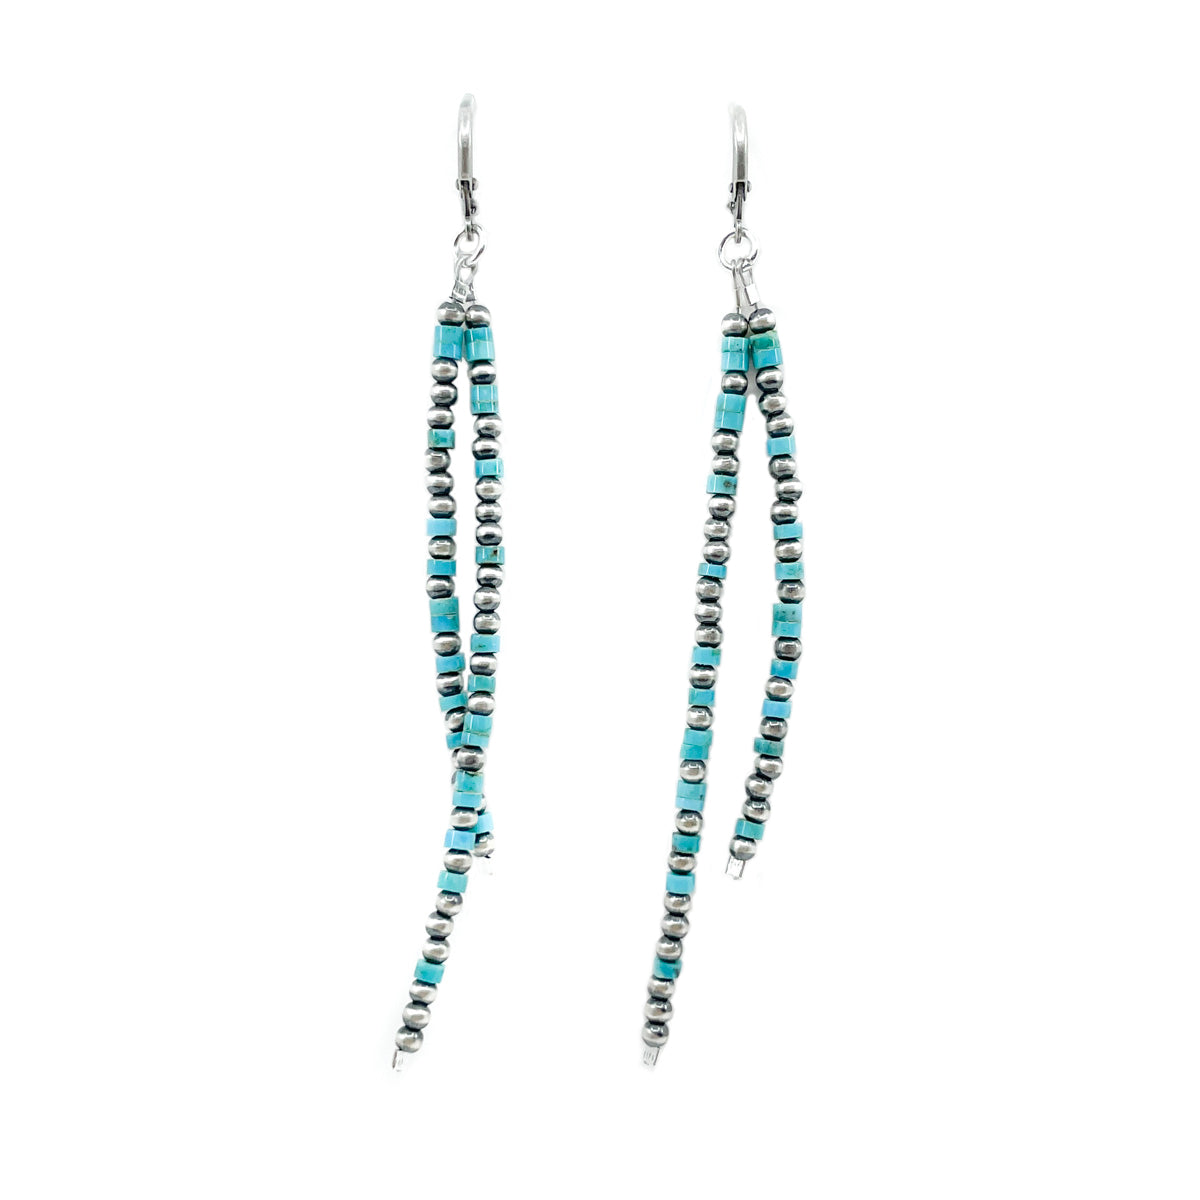 Earrings: Sterling silver lever back ear wires by Esther Reano Turquoise Heishe beads with sterling silver beads Measures approx. 3.25 inches long, dangles 3.5 inches from earlobe